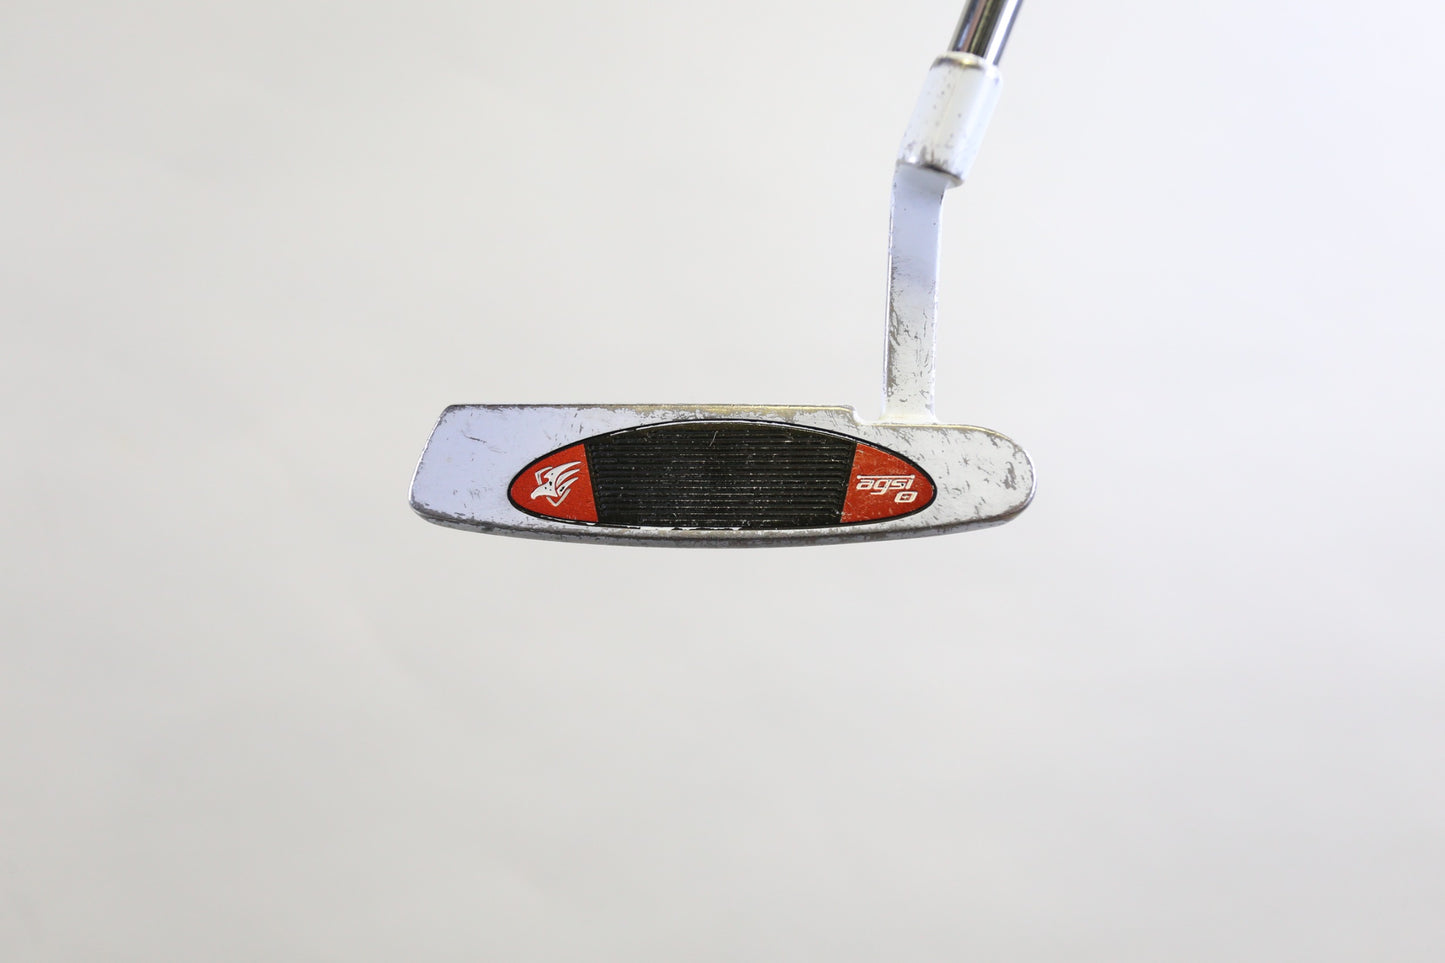 Used TaylorMade Rossa Classic Daytona 1 agsi+ Putter - Right-Handed - 35 in - Blade